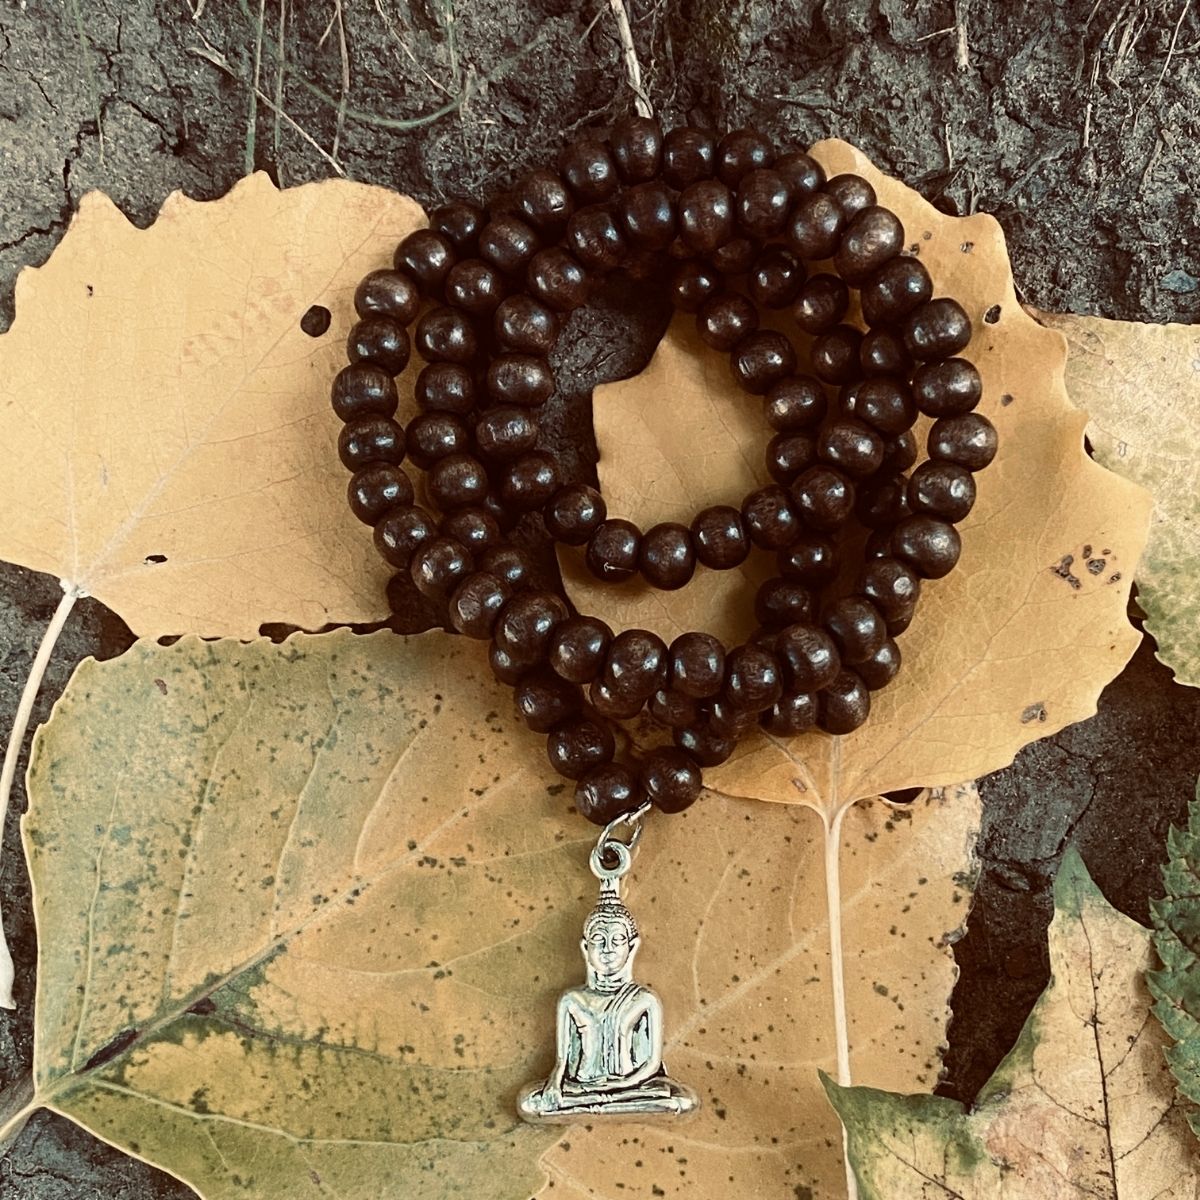 How to Use Mala Beads for Meditation